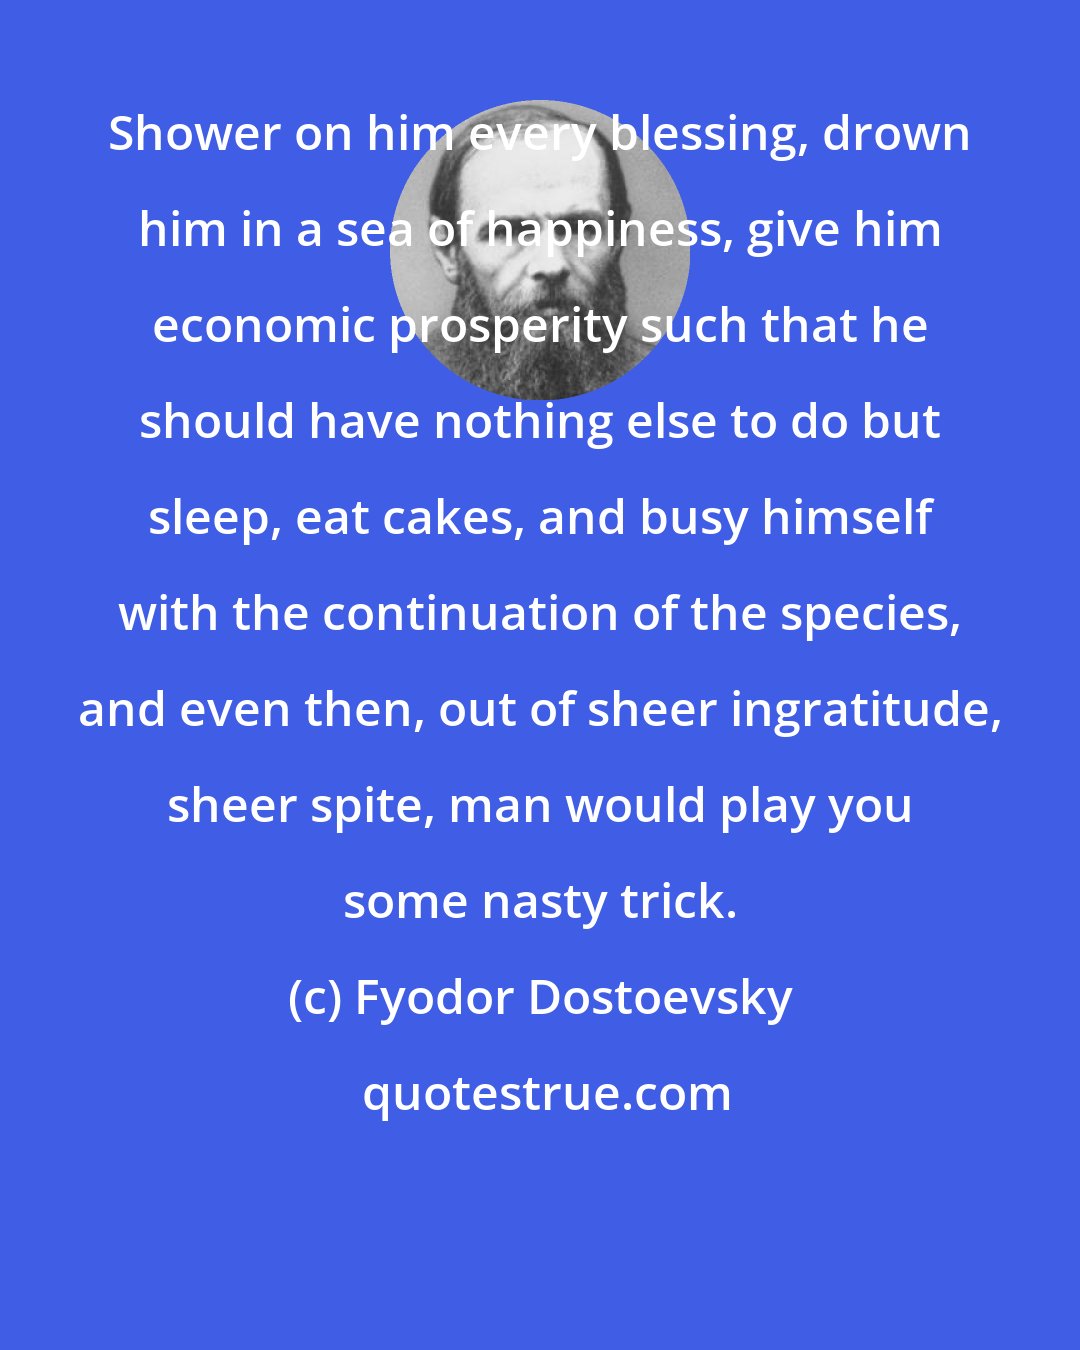 Fyodor Dostoevsky: Shower on him every blessing, drown him in a sea of happiness, give him economic prosperity such that he should have nothing else to do but sleep, eat cakes, and busy himself with the continuation of the species, and even then, out of sheer ingratitude, sheer spite, man would play you some nasty trick.